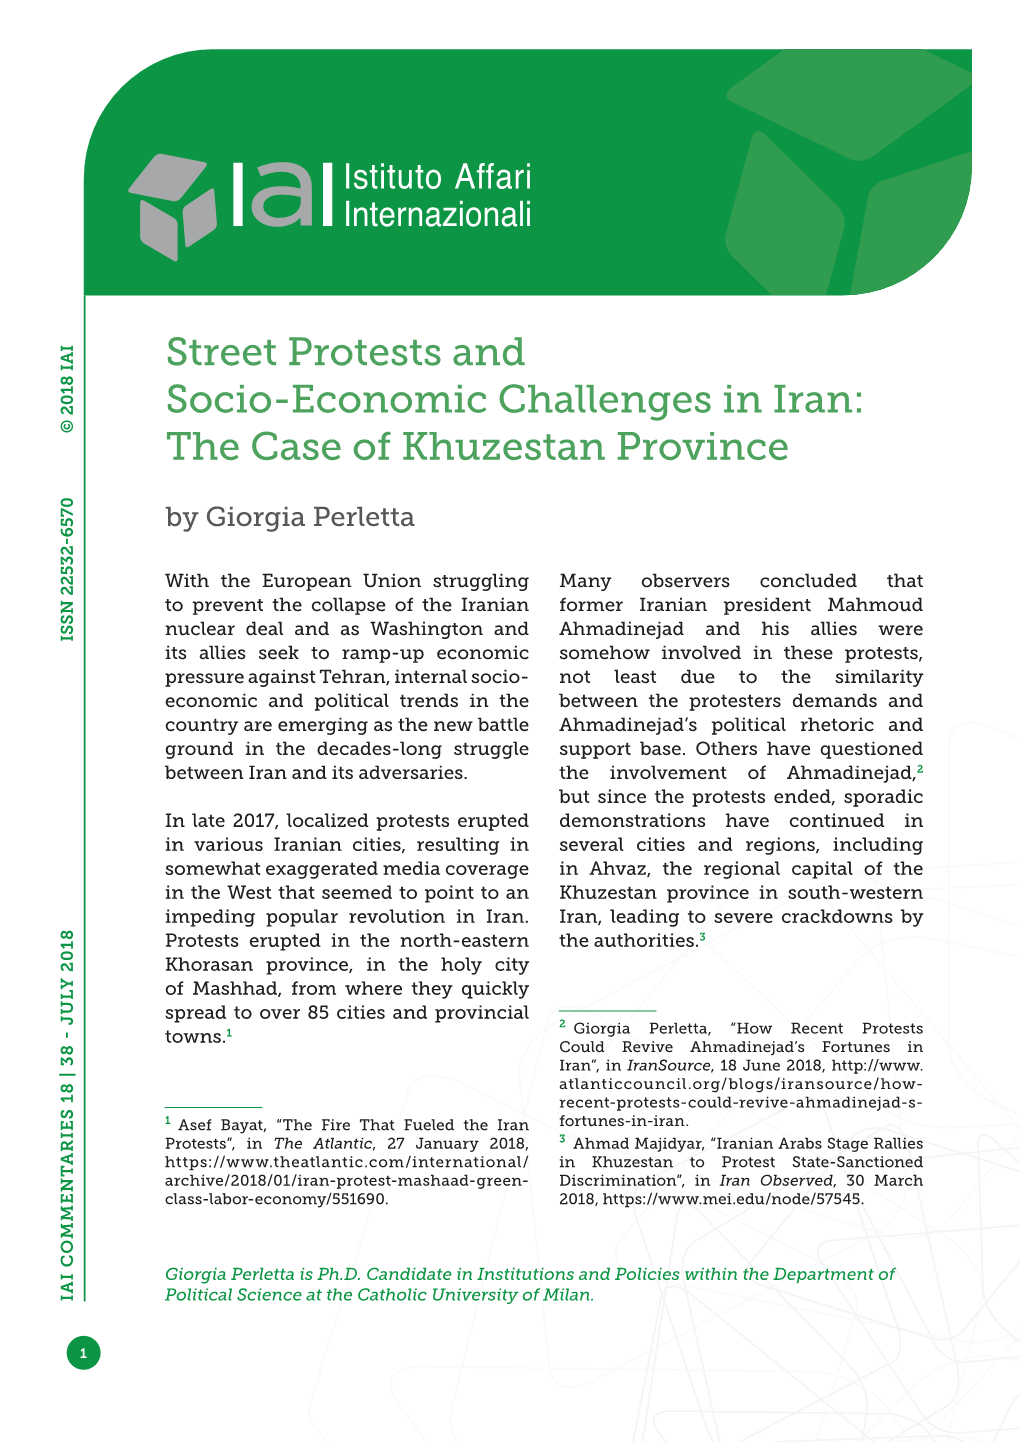 Street Protests and Socio-Economic Challenges in Iran: the Case of Khuzestan Province